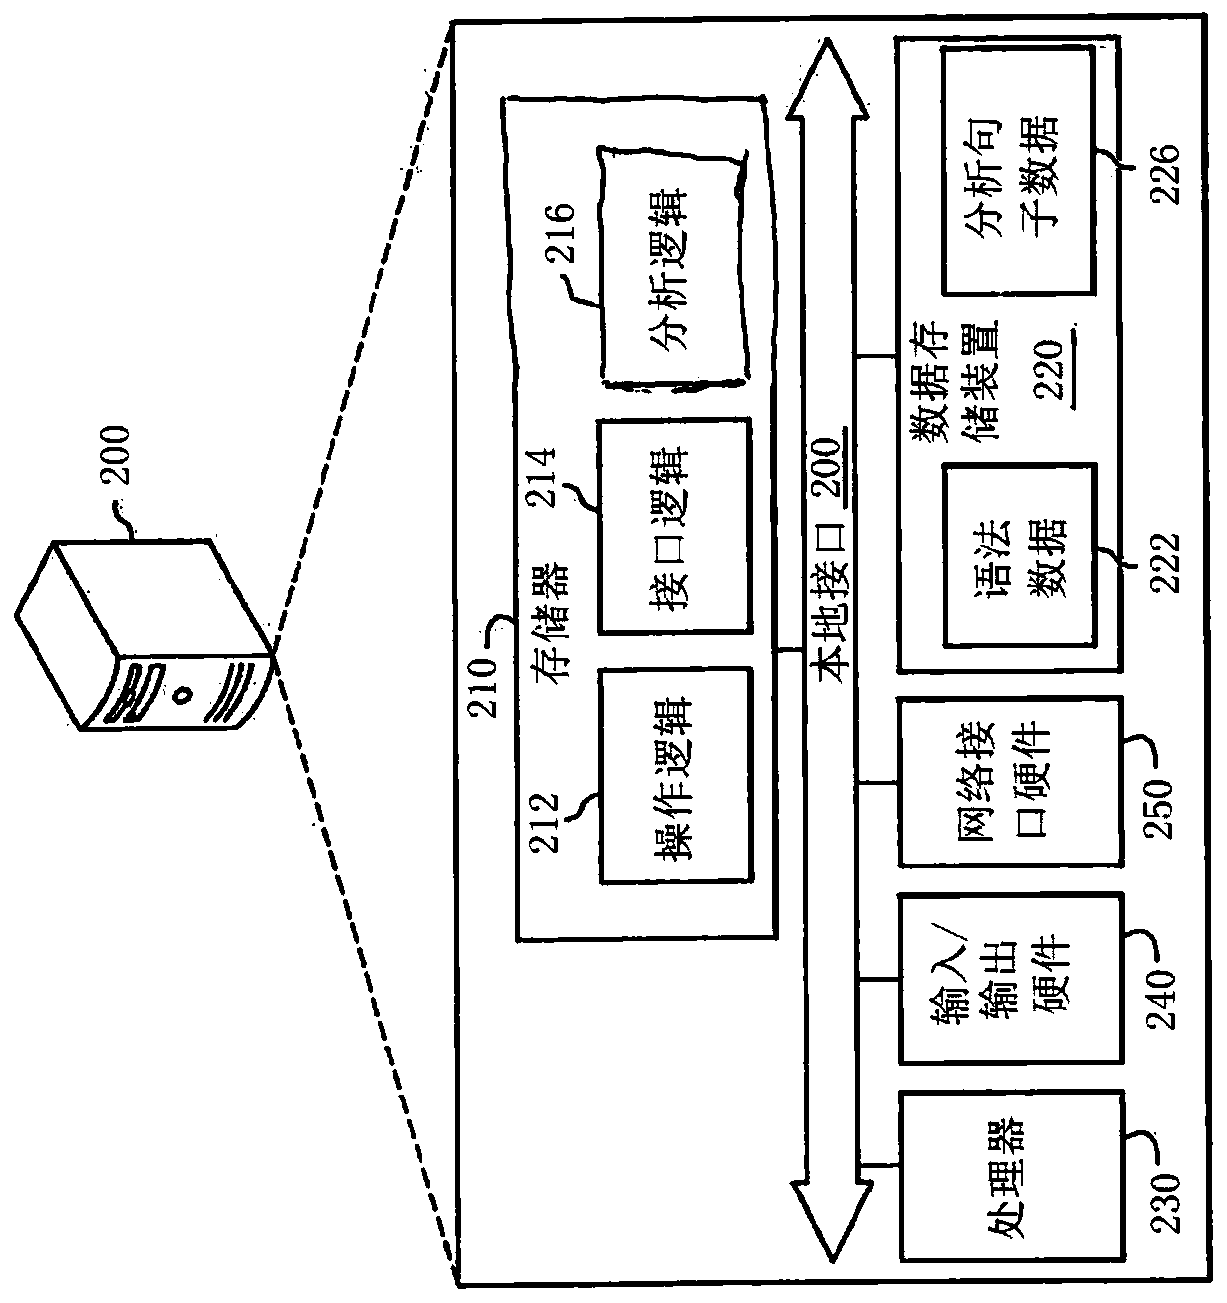 System And Method For Improving Sentence Diagram Construction And Analysis